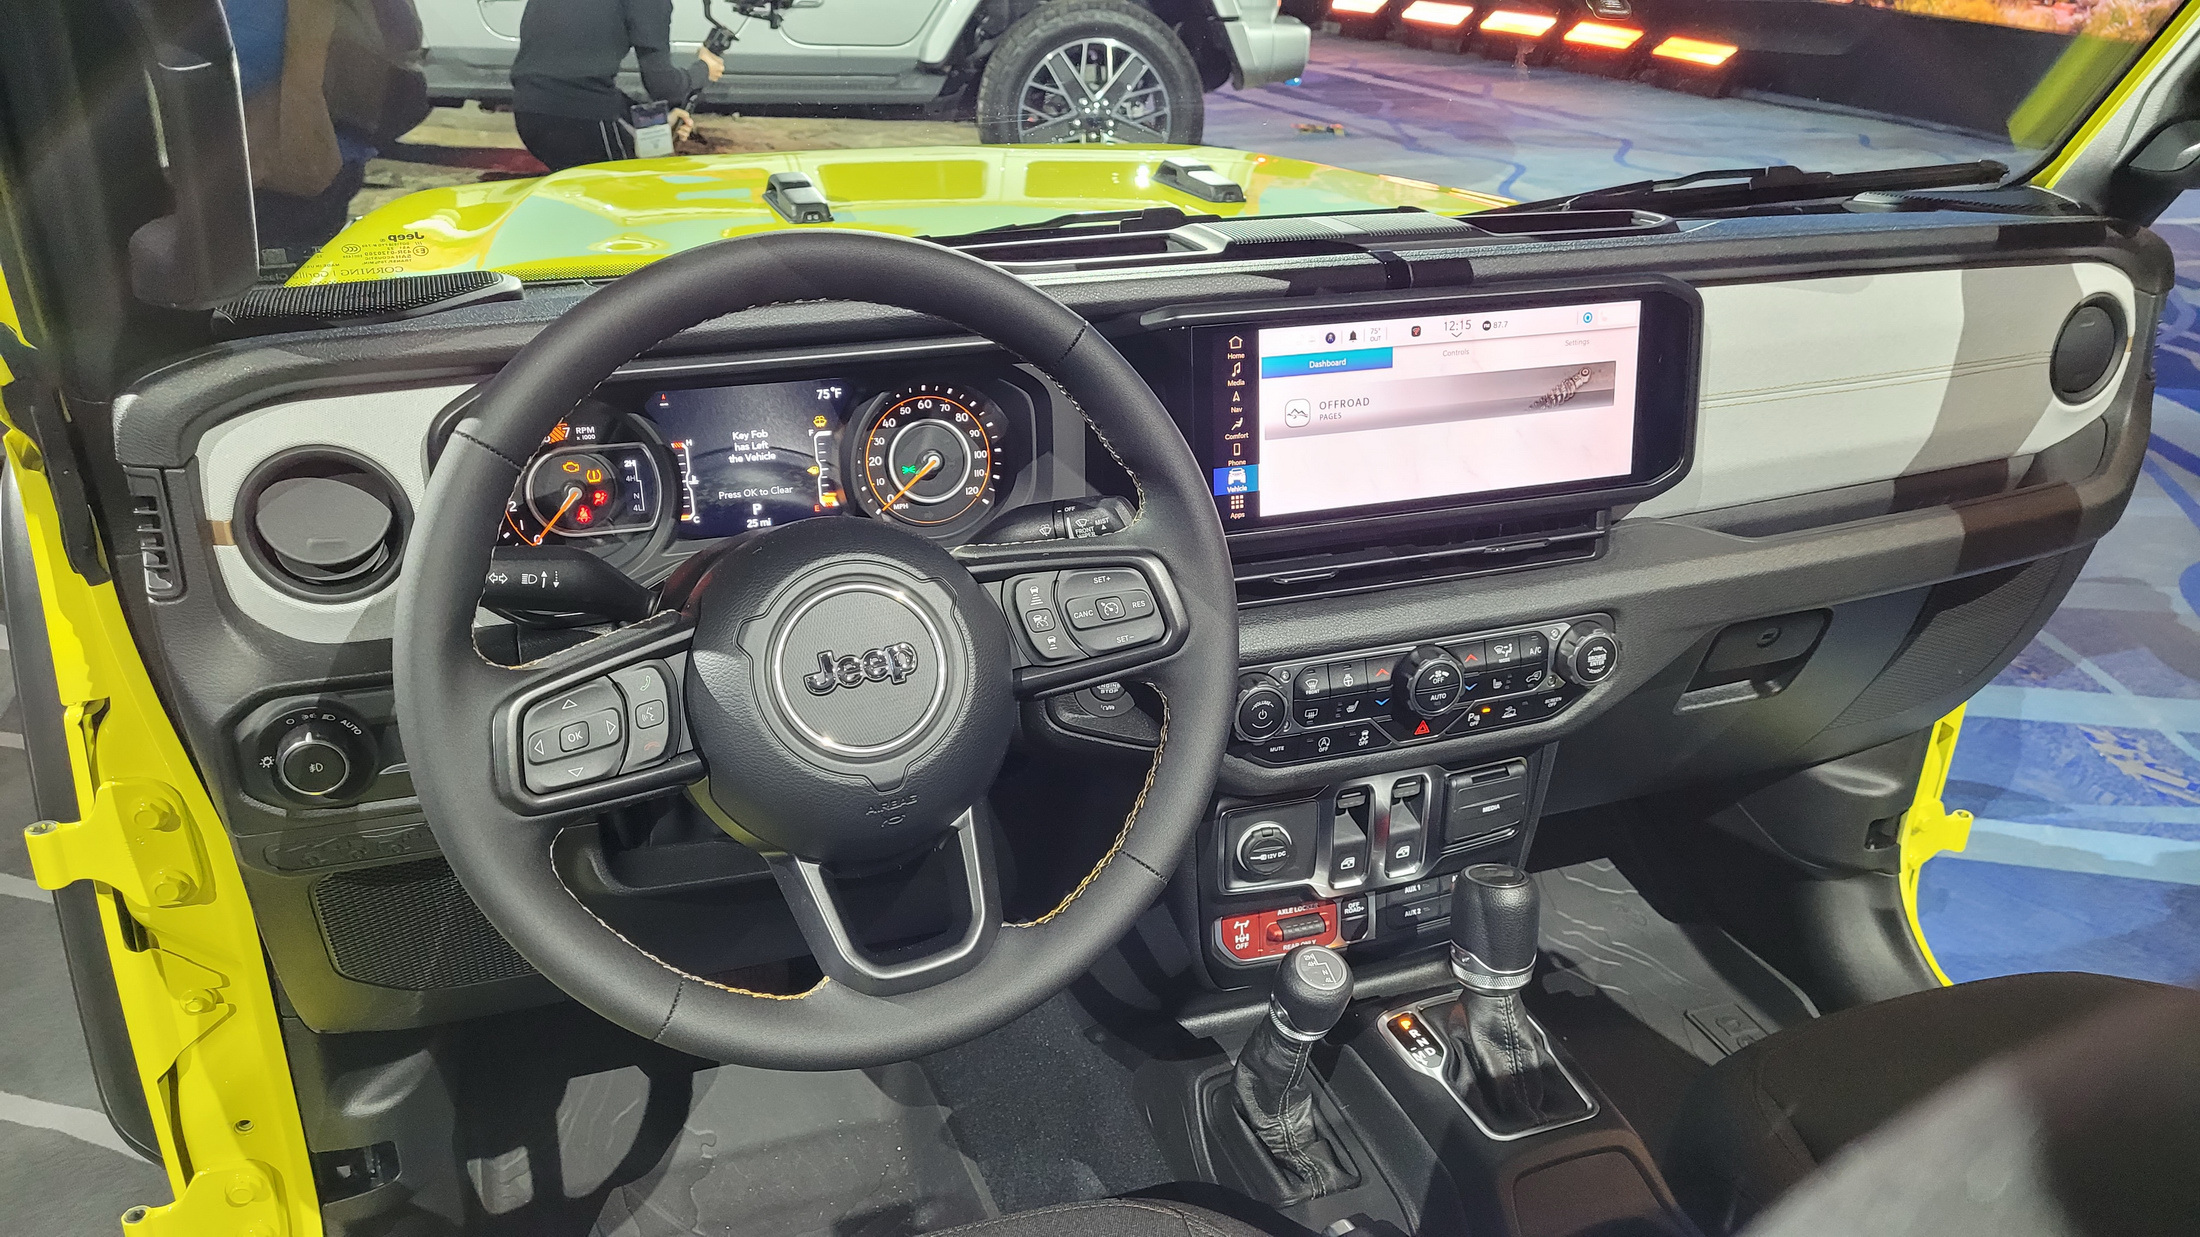 2024 Jeep Wrangler Gets A Divisive Face But A New Interior